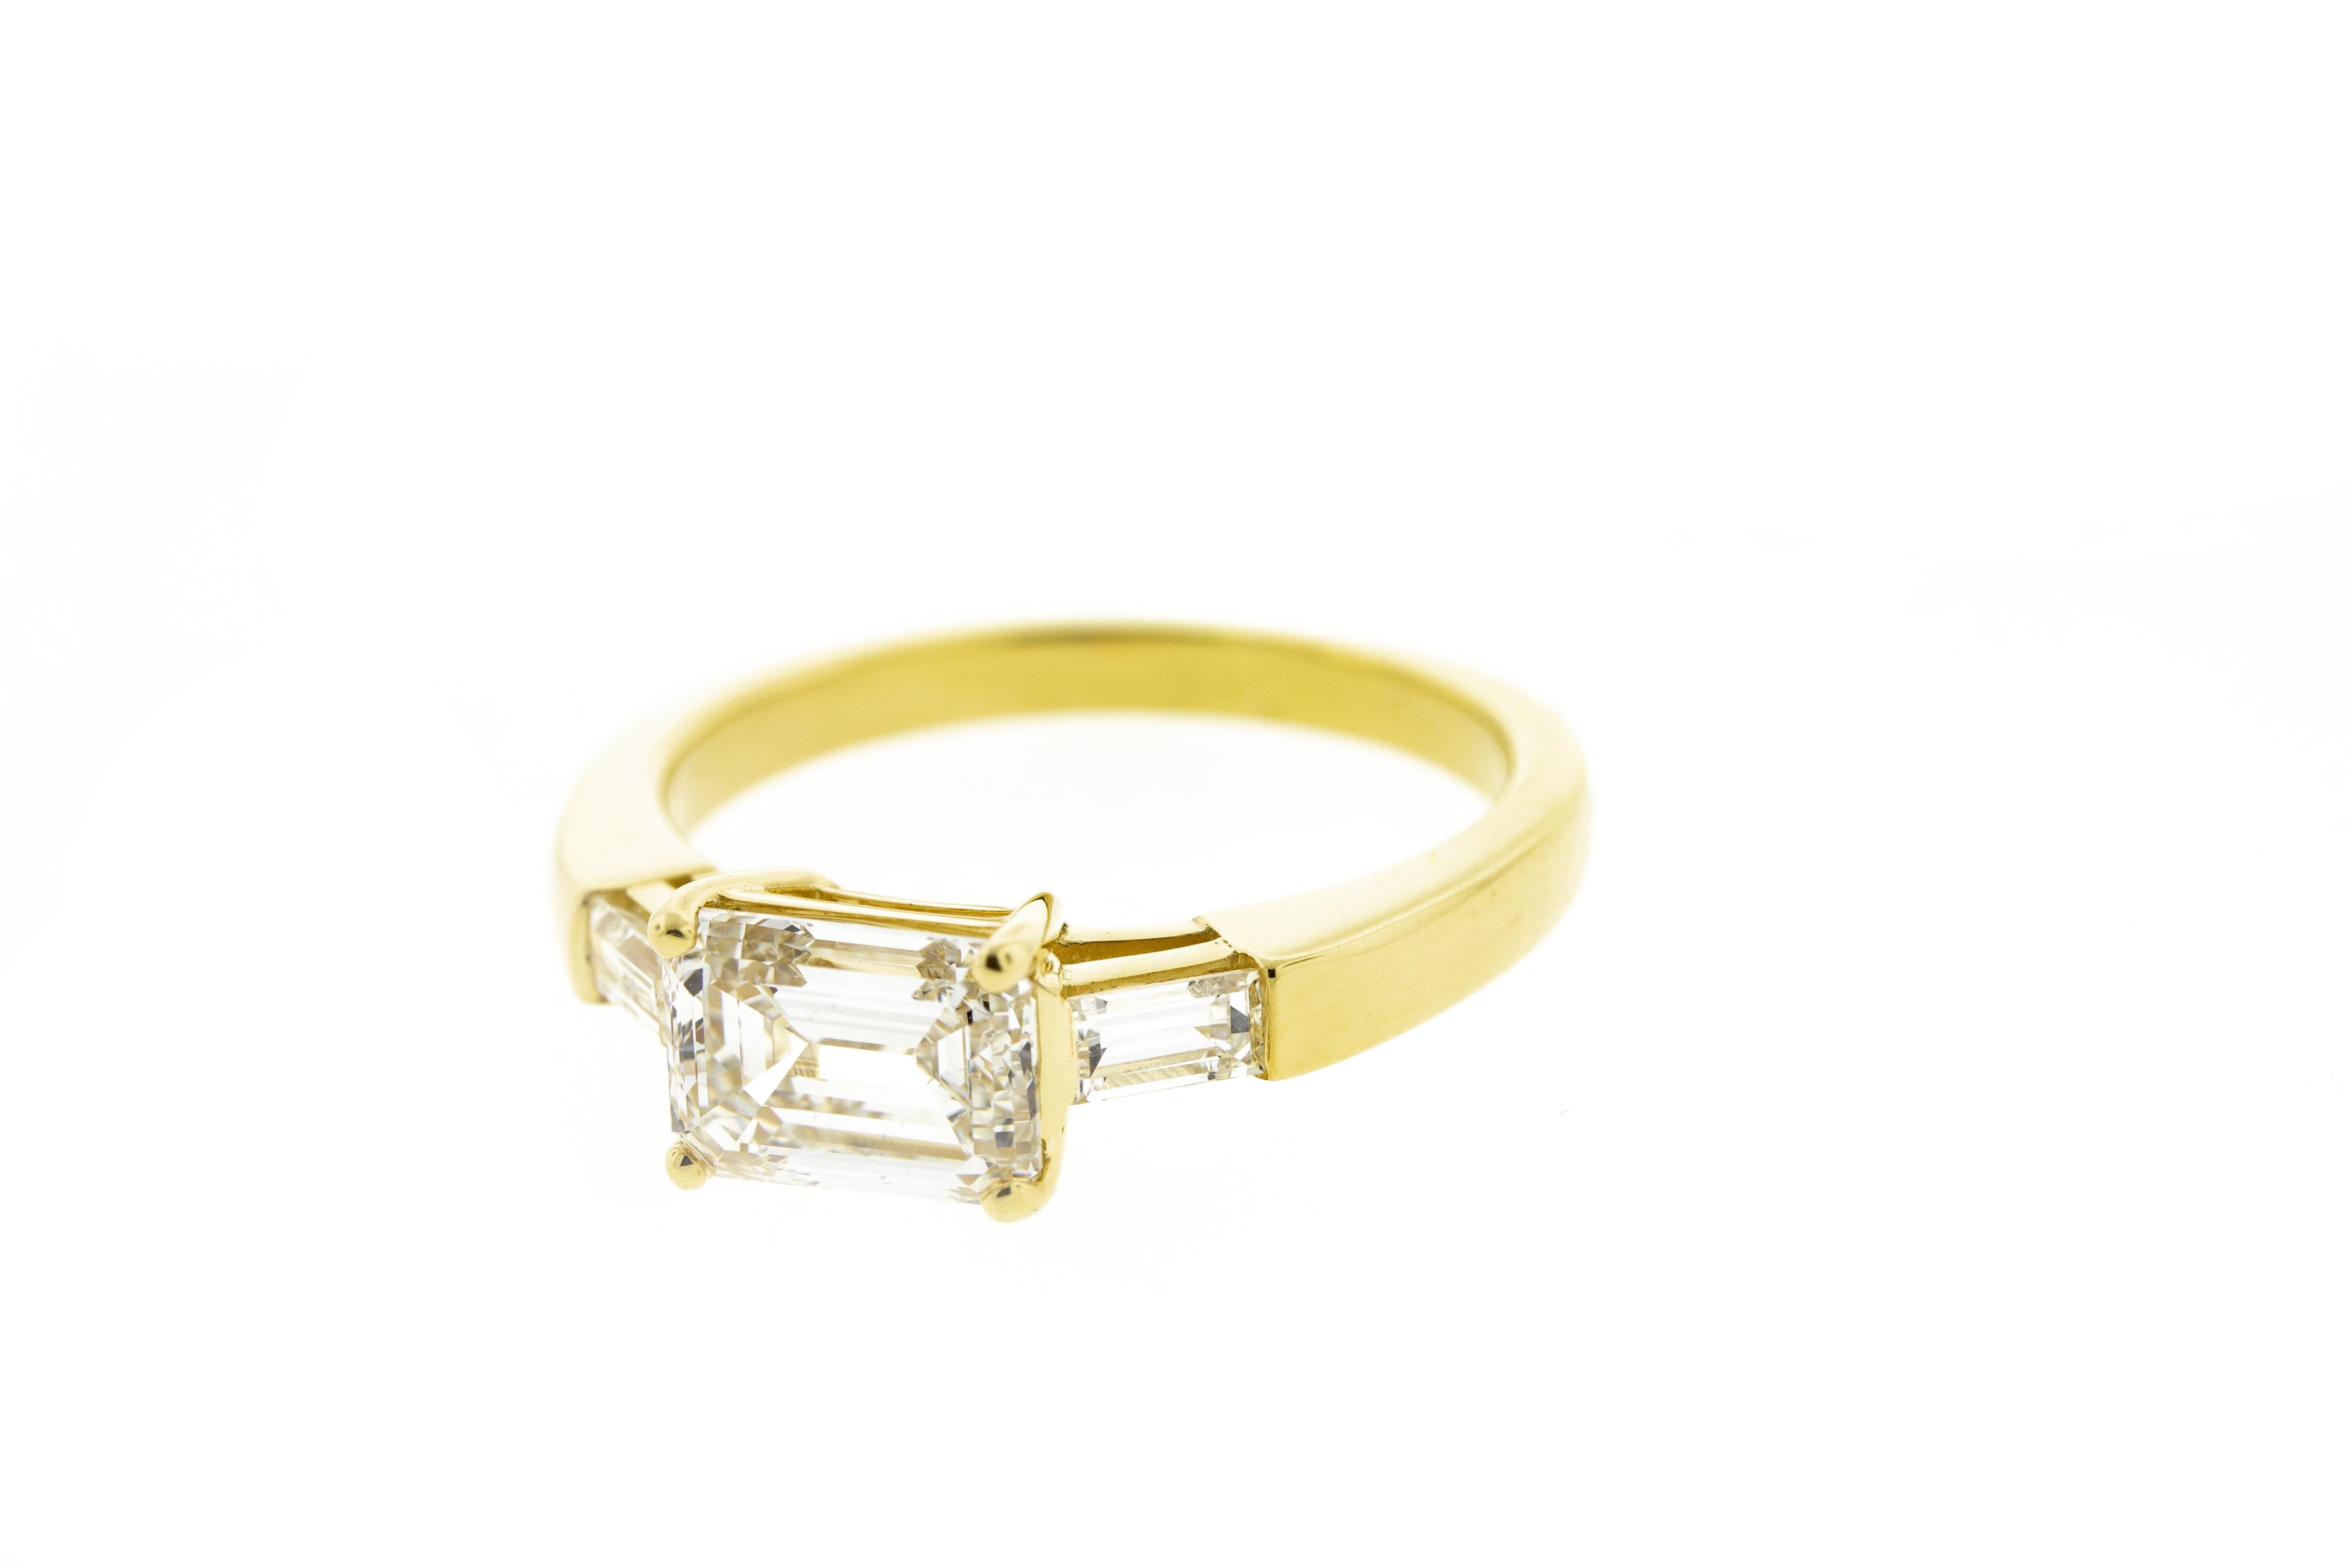 This three stone emerald cut diamond engagement ring is set in yellow gold. It features three emerald cut diamonds in an east-west orientation rather than the normal north south. It's a refreshing twist on a timeless classic. This ring can be